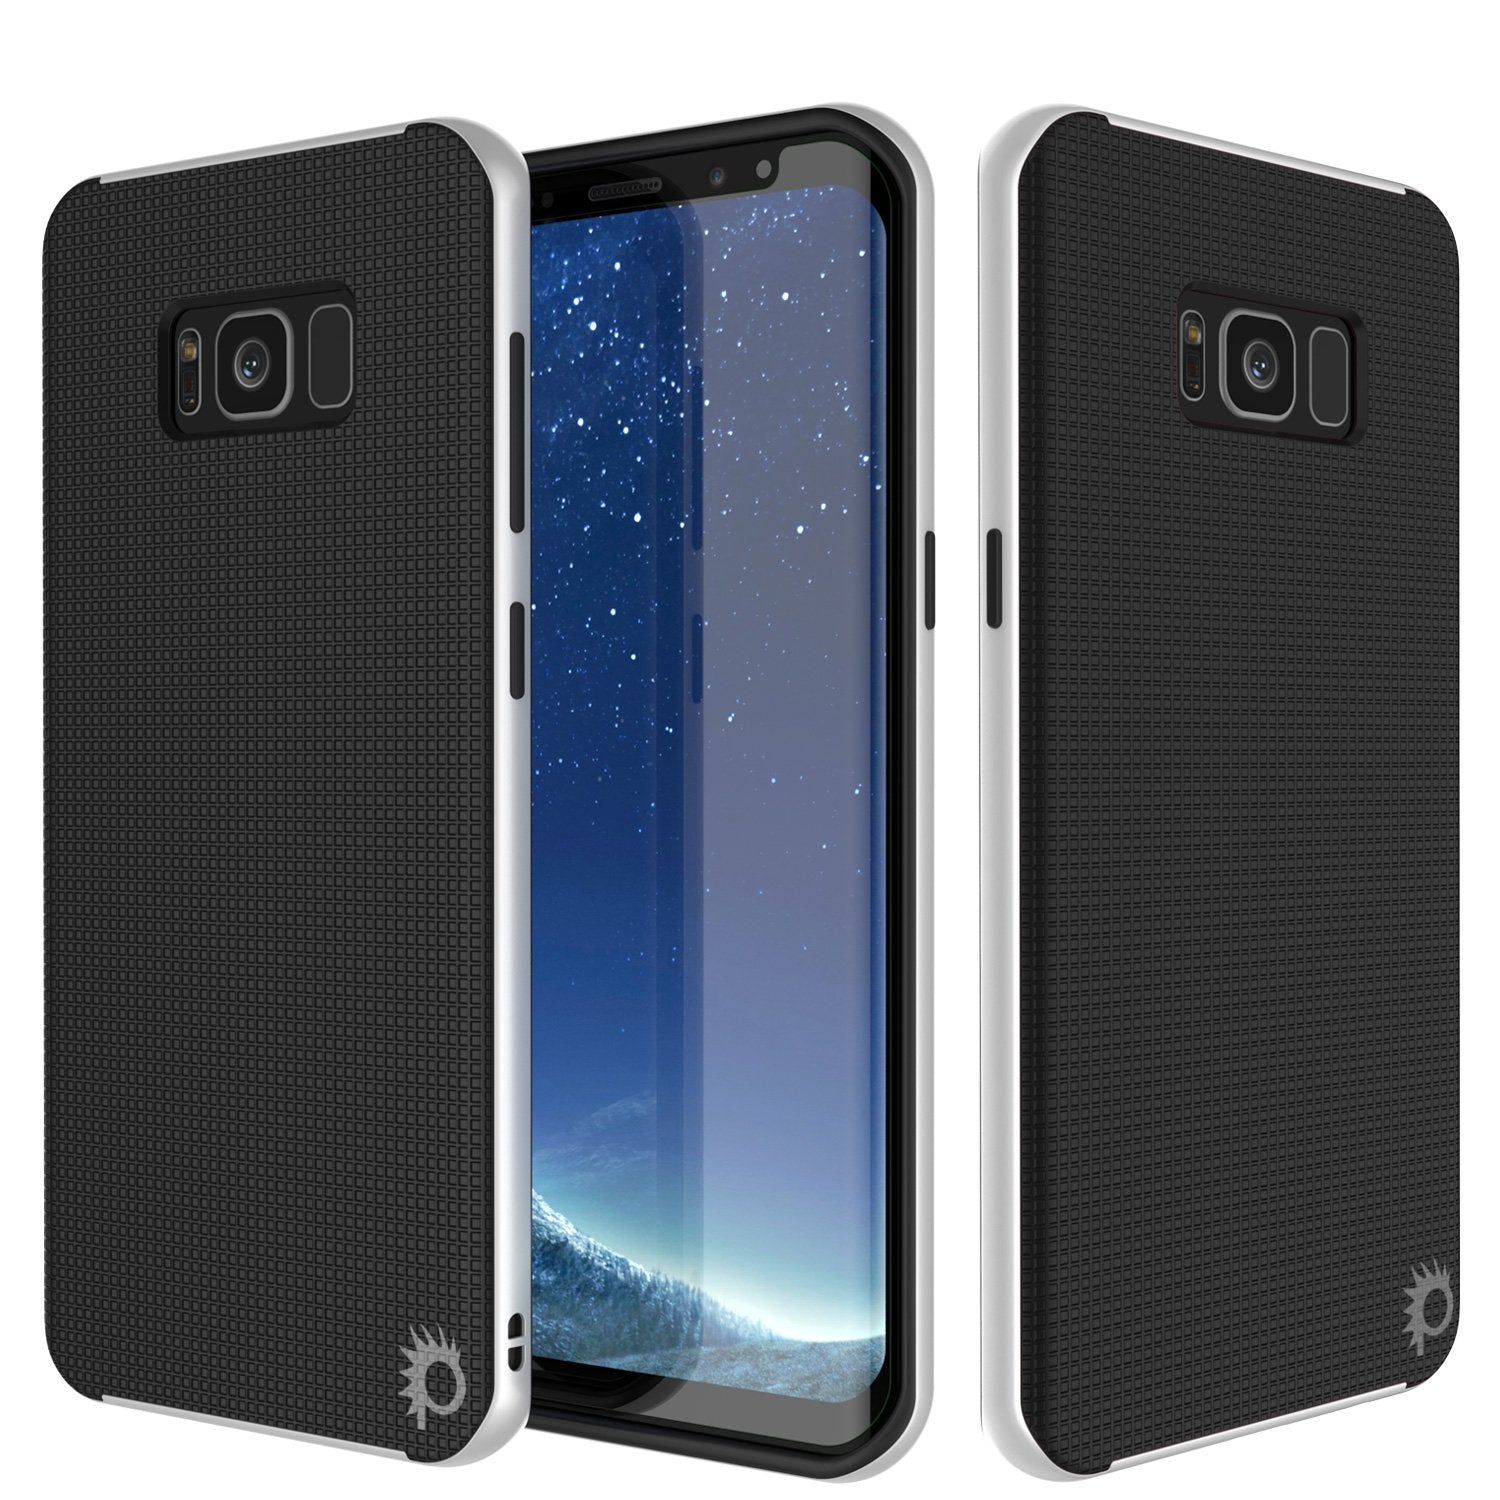 Galaxy S8 Case, PunkCase [Stealth Series] Hybrid 3-Piece Shockproof Dual Layer Cover [Non-Slip] [Soft TPU + PC Bumper] with PUNKSHIELD Screen Protector for Samsung S8 Edge [White]